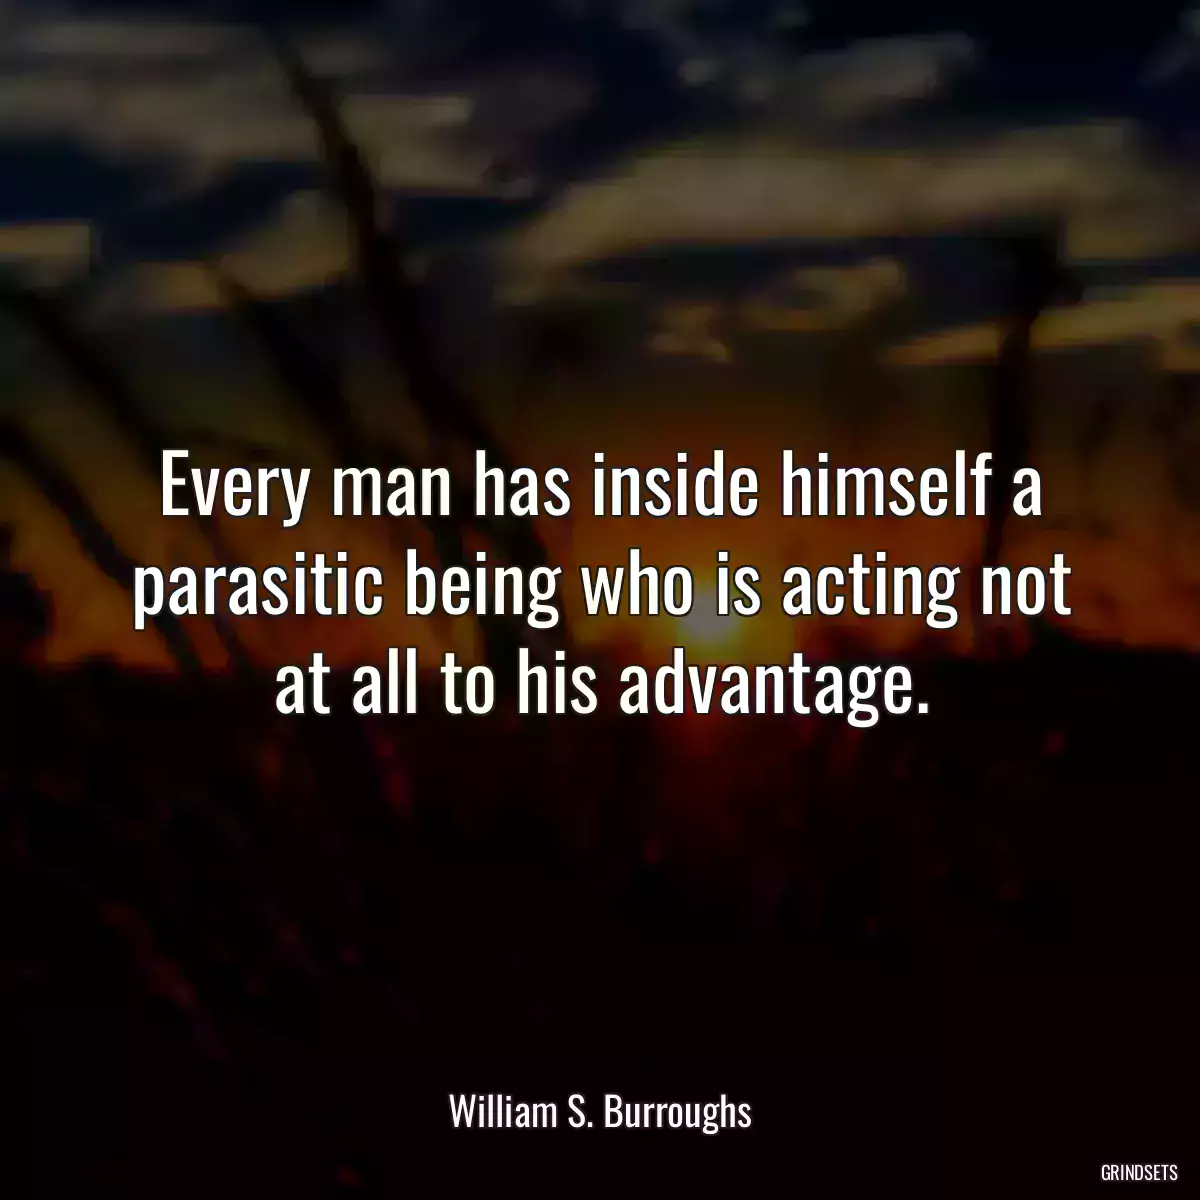 Every man has inside himself a parasitic being who is acting not at all to his advantage.